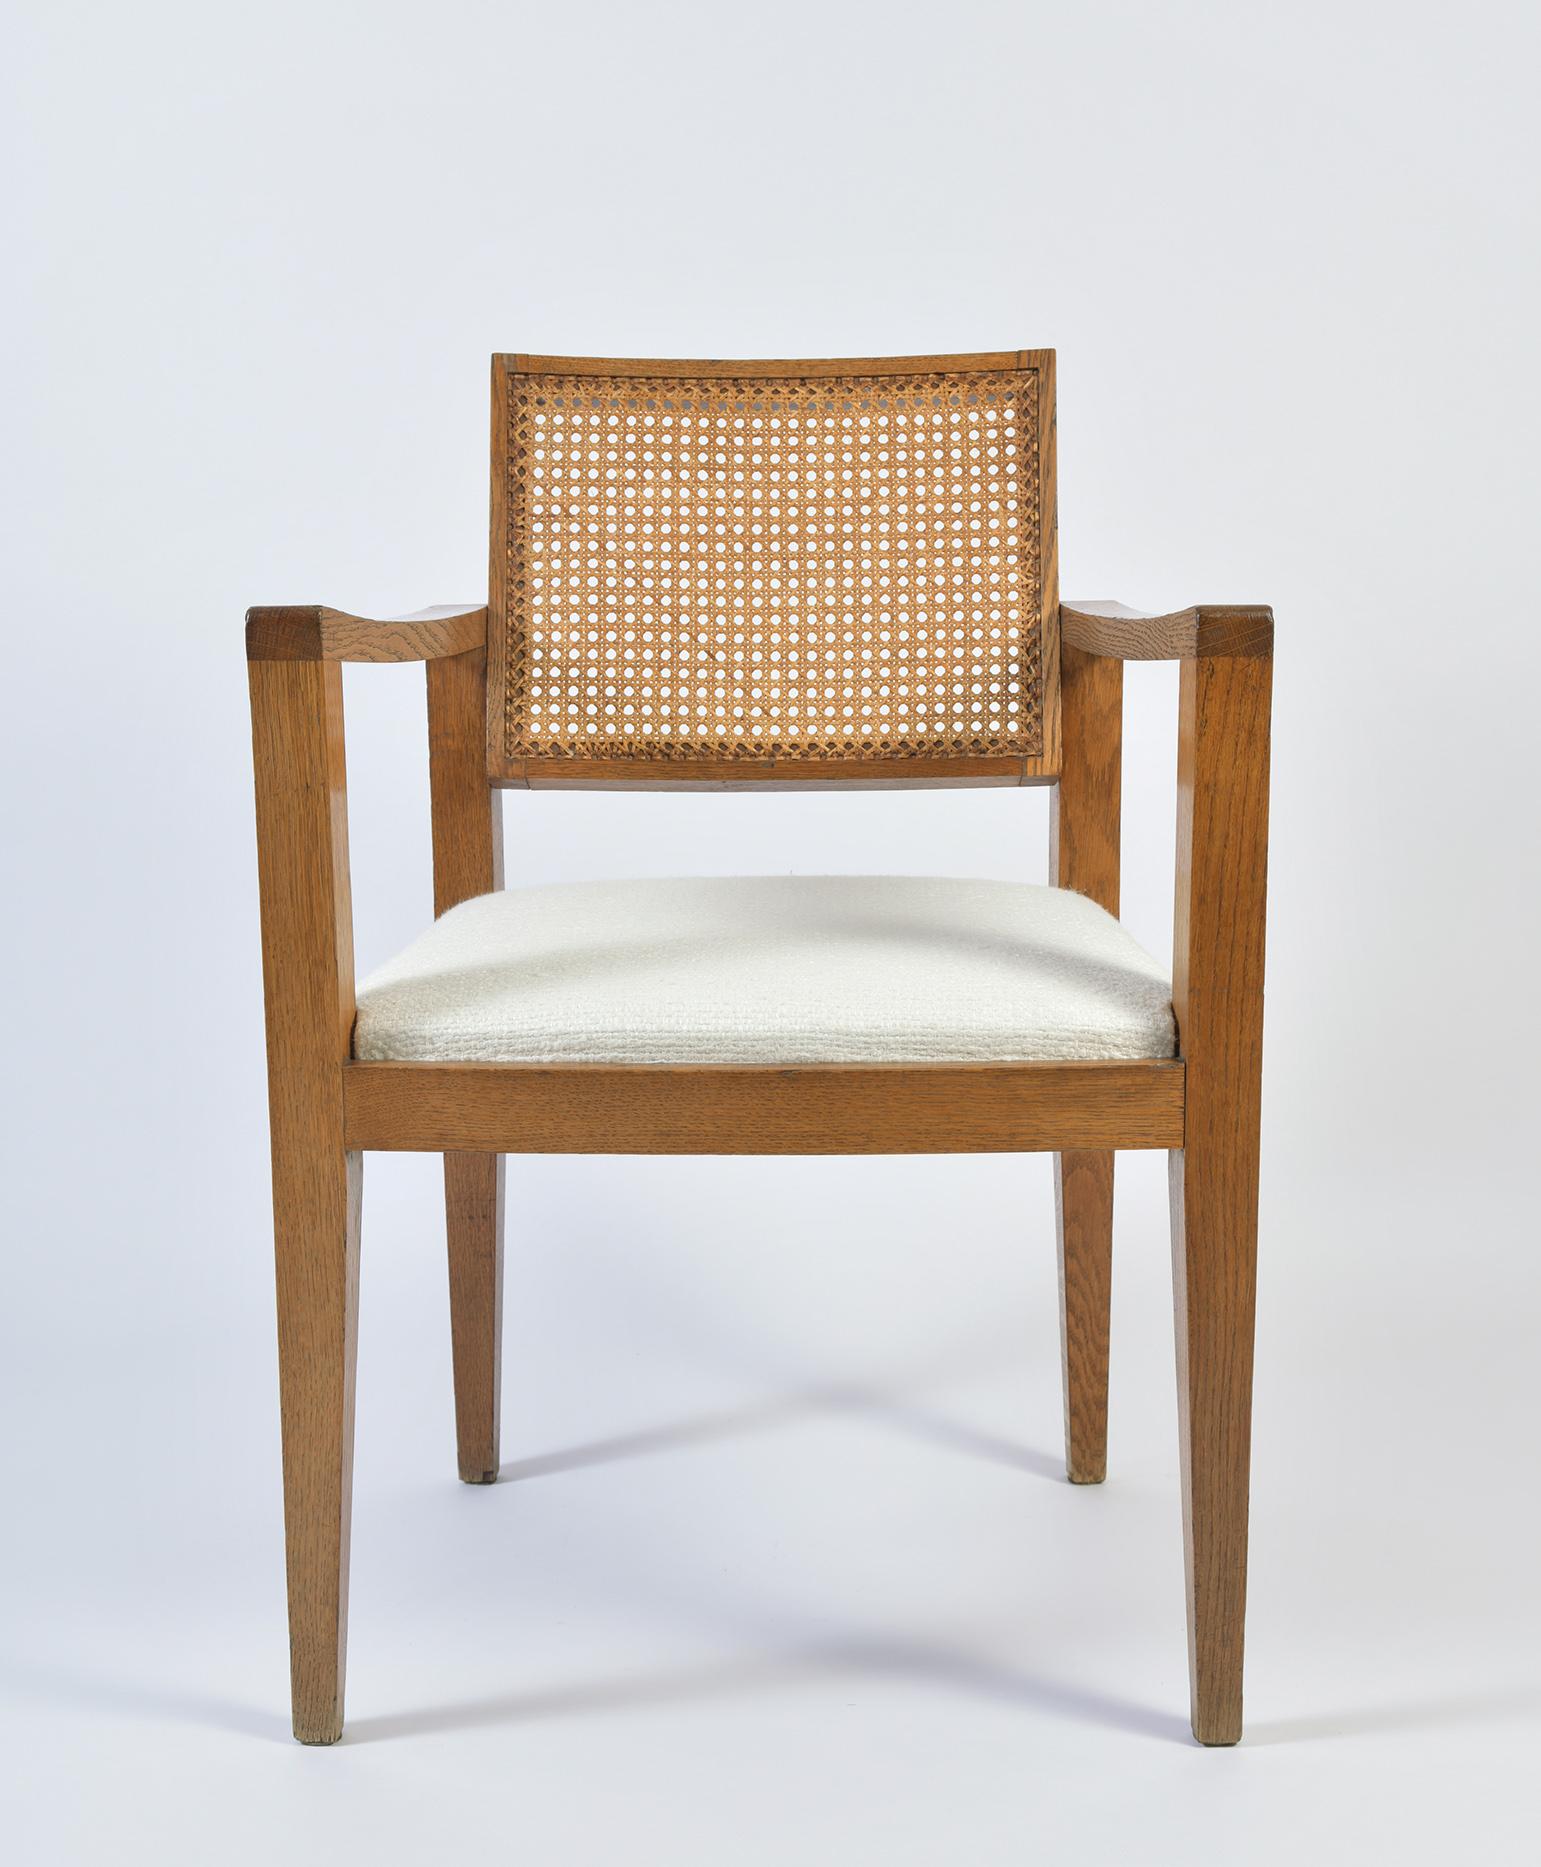 A French post war reconstruction blond oak and cane armchair by Emile Seigneur.
France, circa 1950.

Alumnus of the Ecole Boulle, Emile Seigneur followed the steps of Marcel Gascoin, Jacques Hauville and Roger Landault, by designing post war